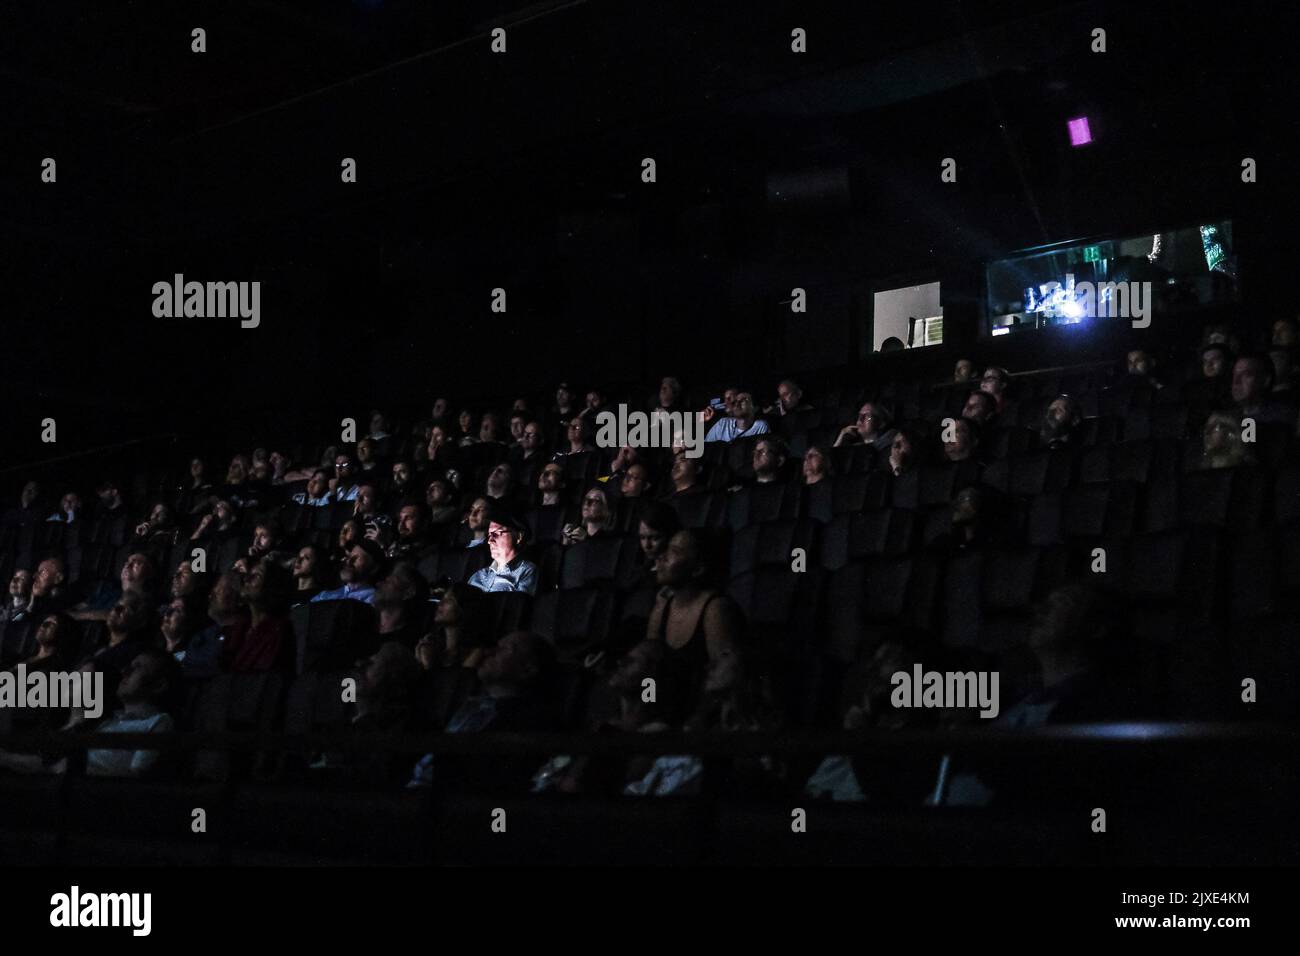 'Turn your bloody phone off' - Atmosphere around the festival photographed during Frightfest 2022 at Cineworld Leicester Square, London on Sunday 28 August 2022 . Picture by Julie Edwards. Stock Photo